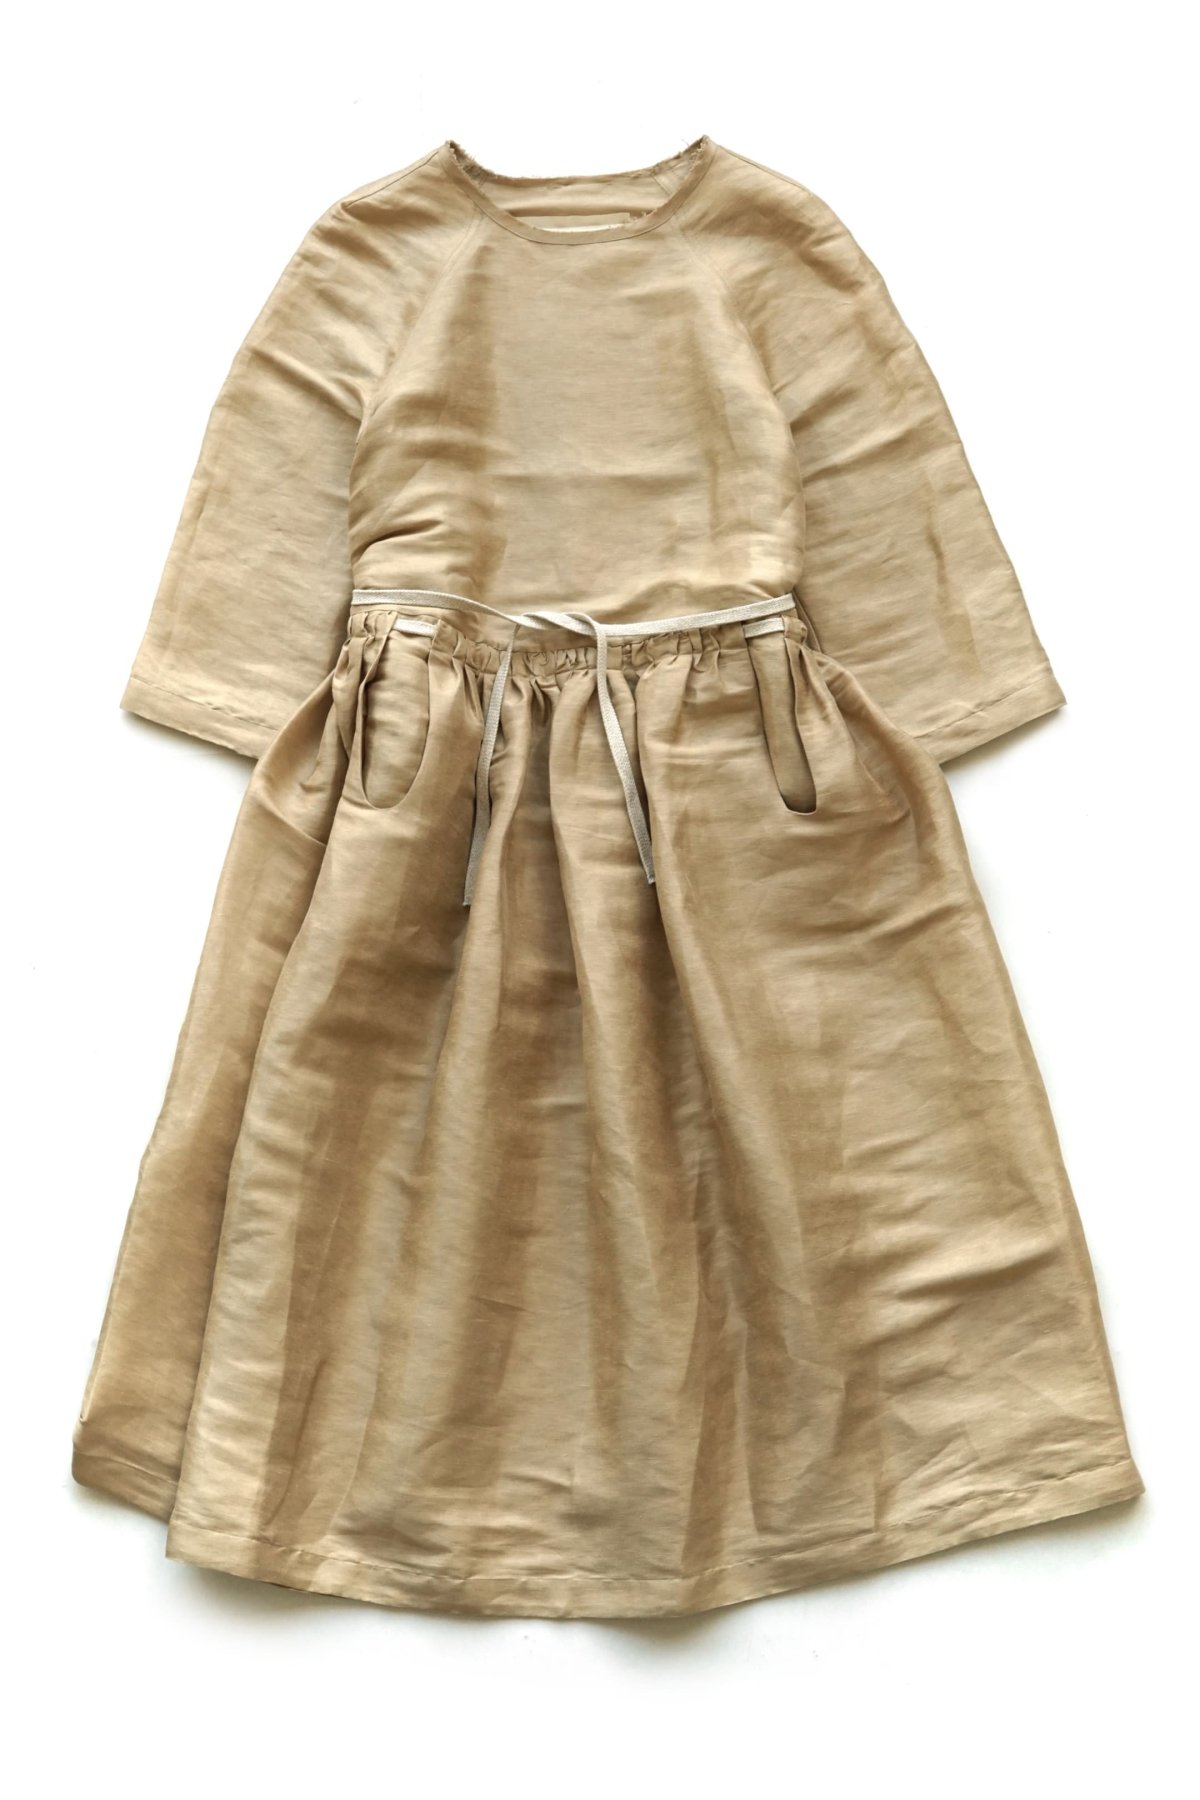 1 toogood - THE SPINNER DRESS - PAPERY LINEN - PARCHMENT